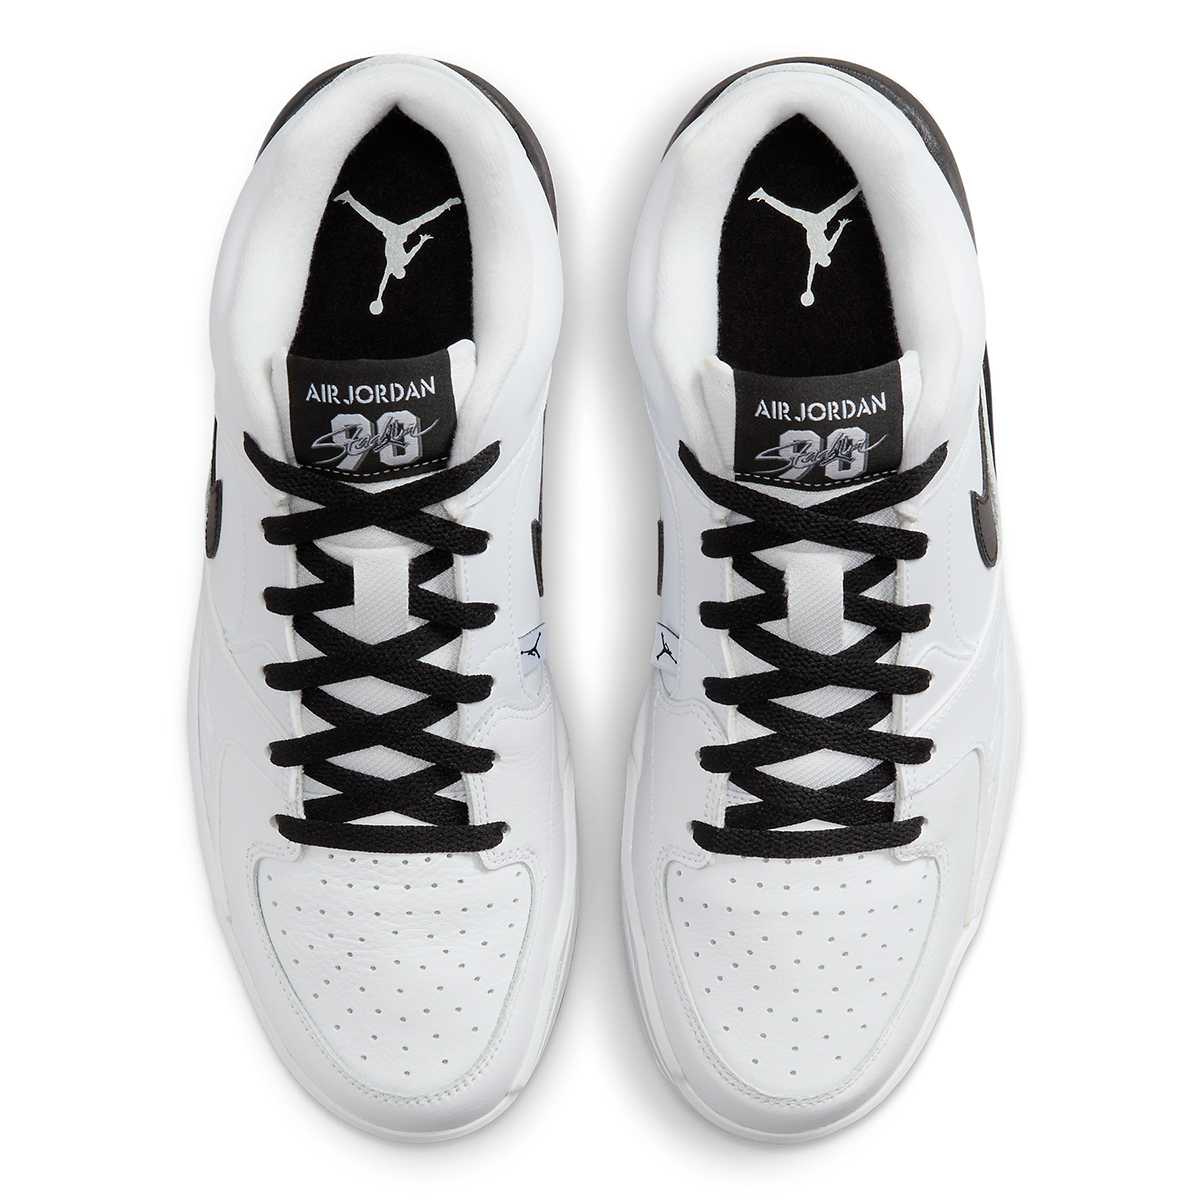 Jordan Weak continues to keep us on our toes for the 30th anniversary of the Air Jordan Weak line this year White Black Panda Hf5258 102 6